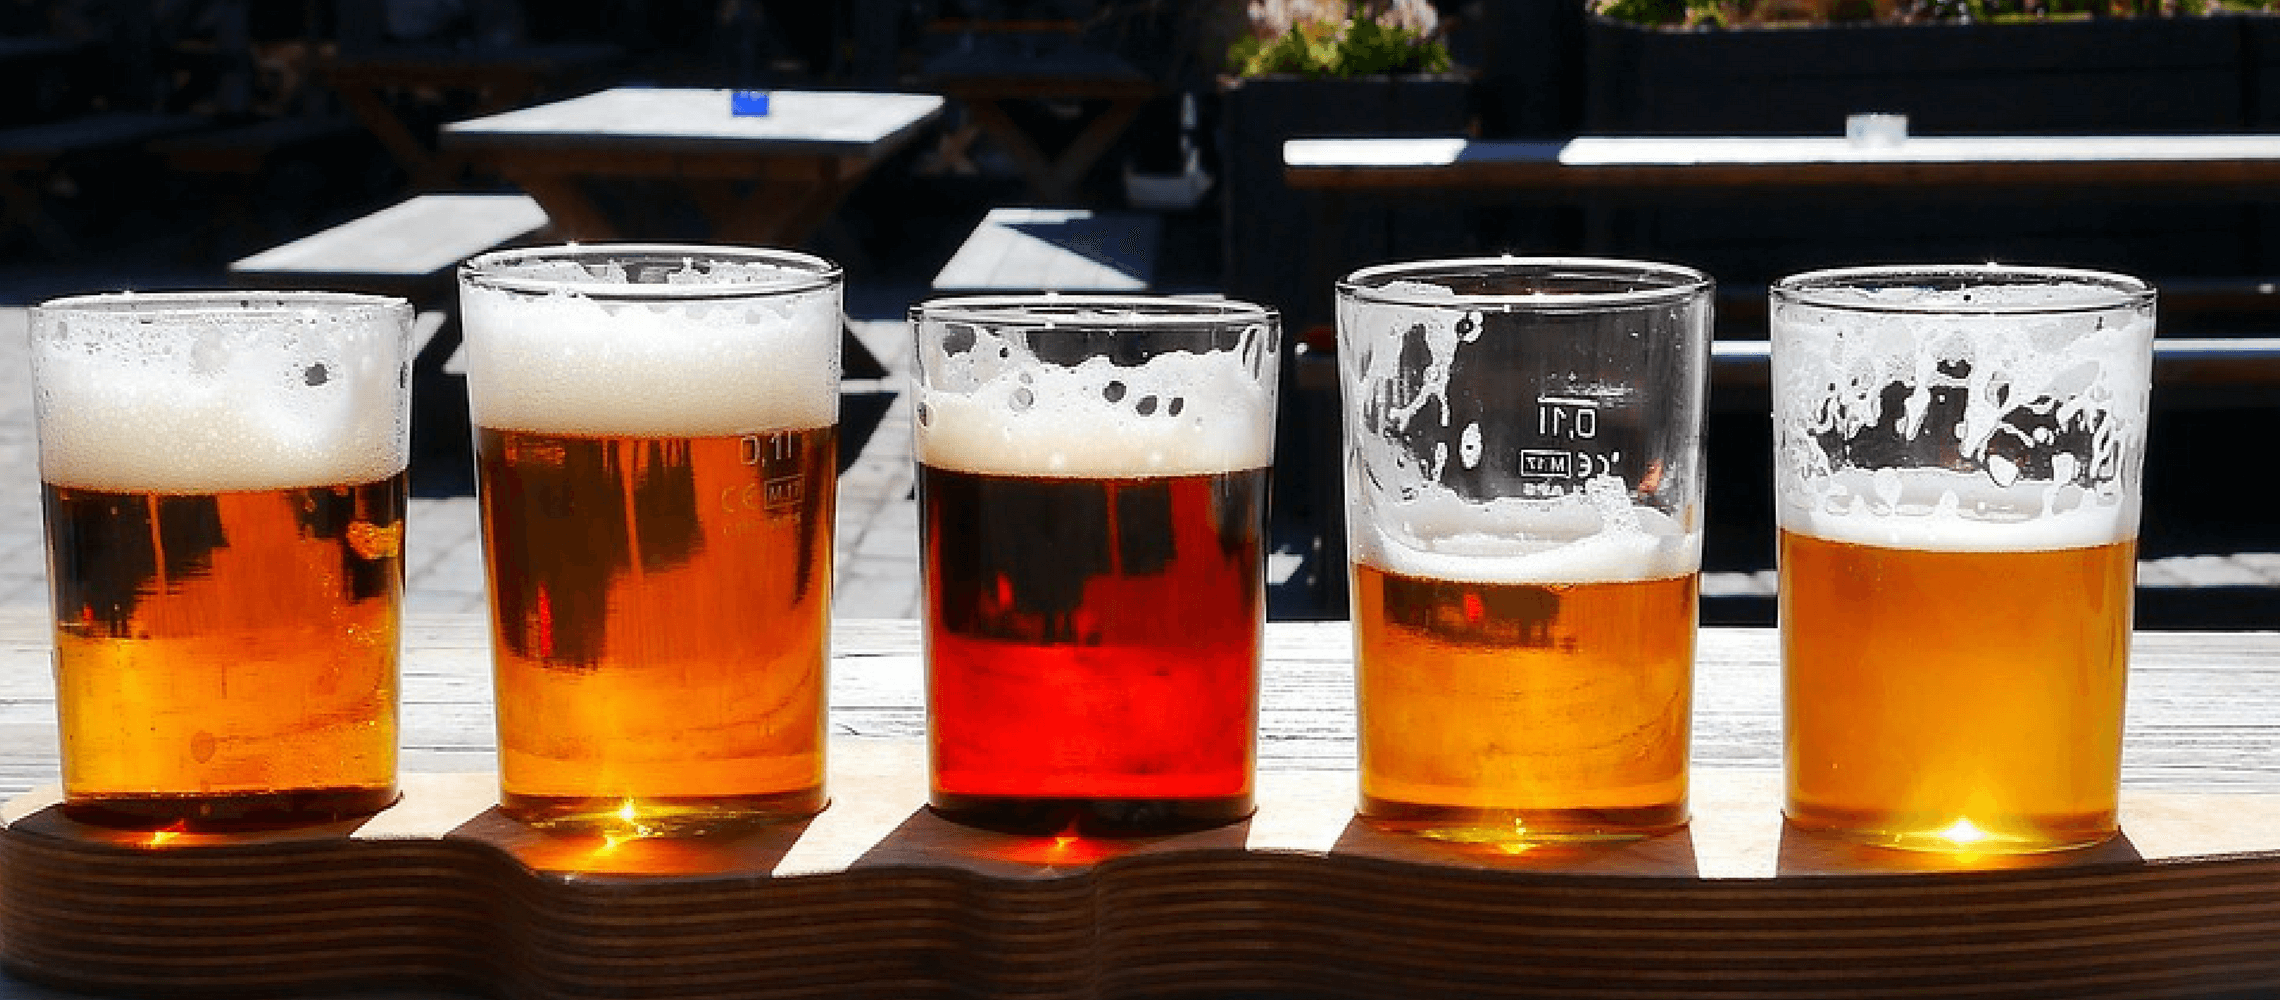 Photo for: London Beer Competition To Reward Beers For How They Look, Taste And Cost